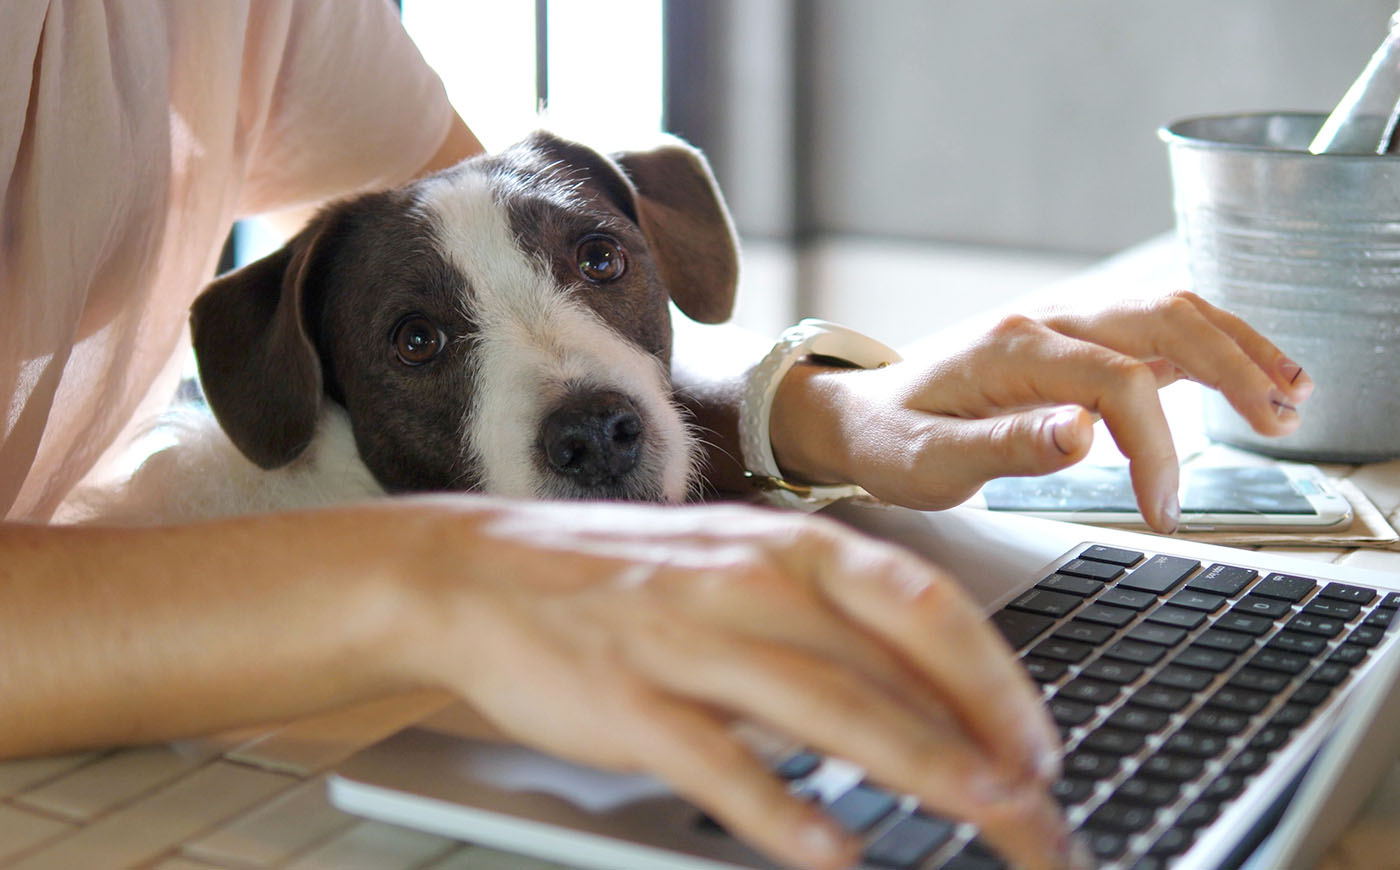 Close up shot of a dog sitting on their owner's lap while they type on a laptop